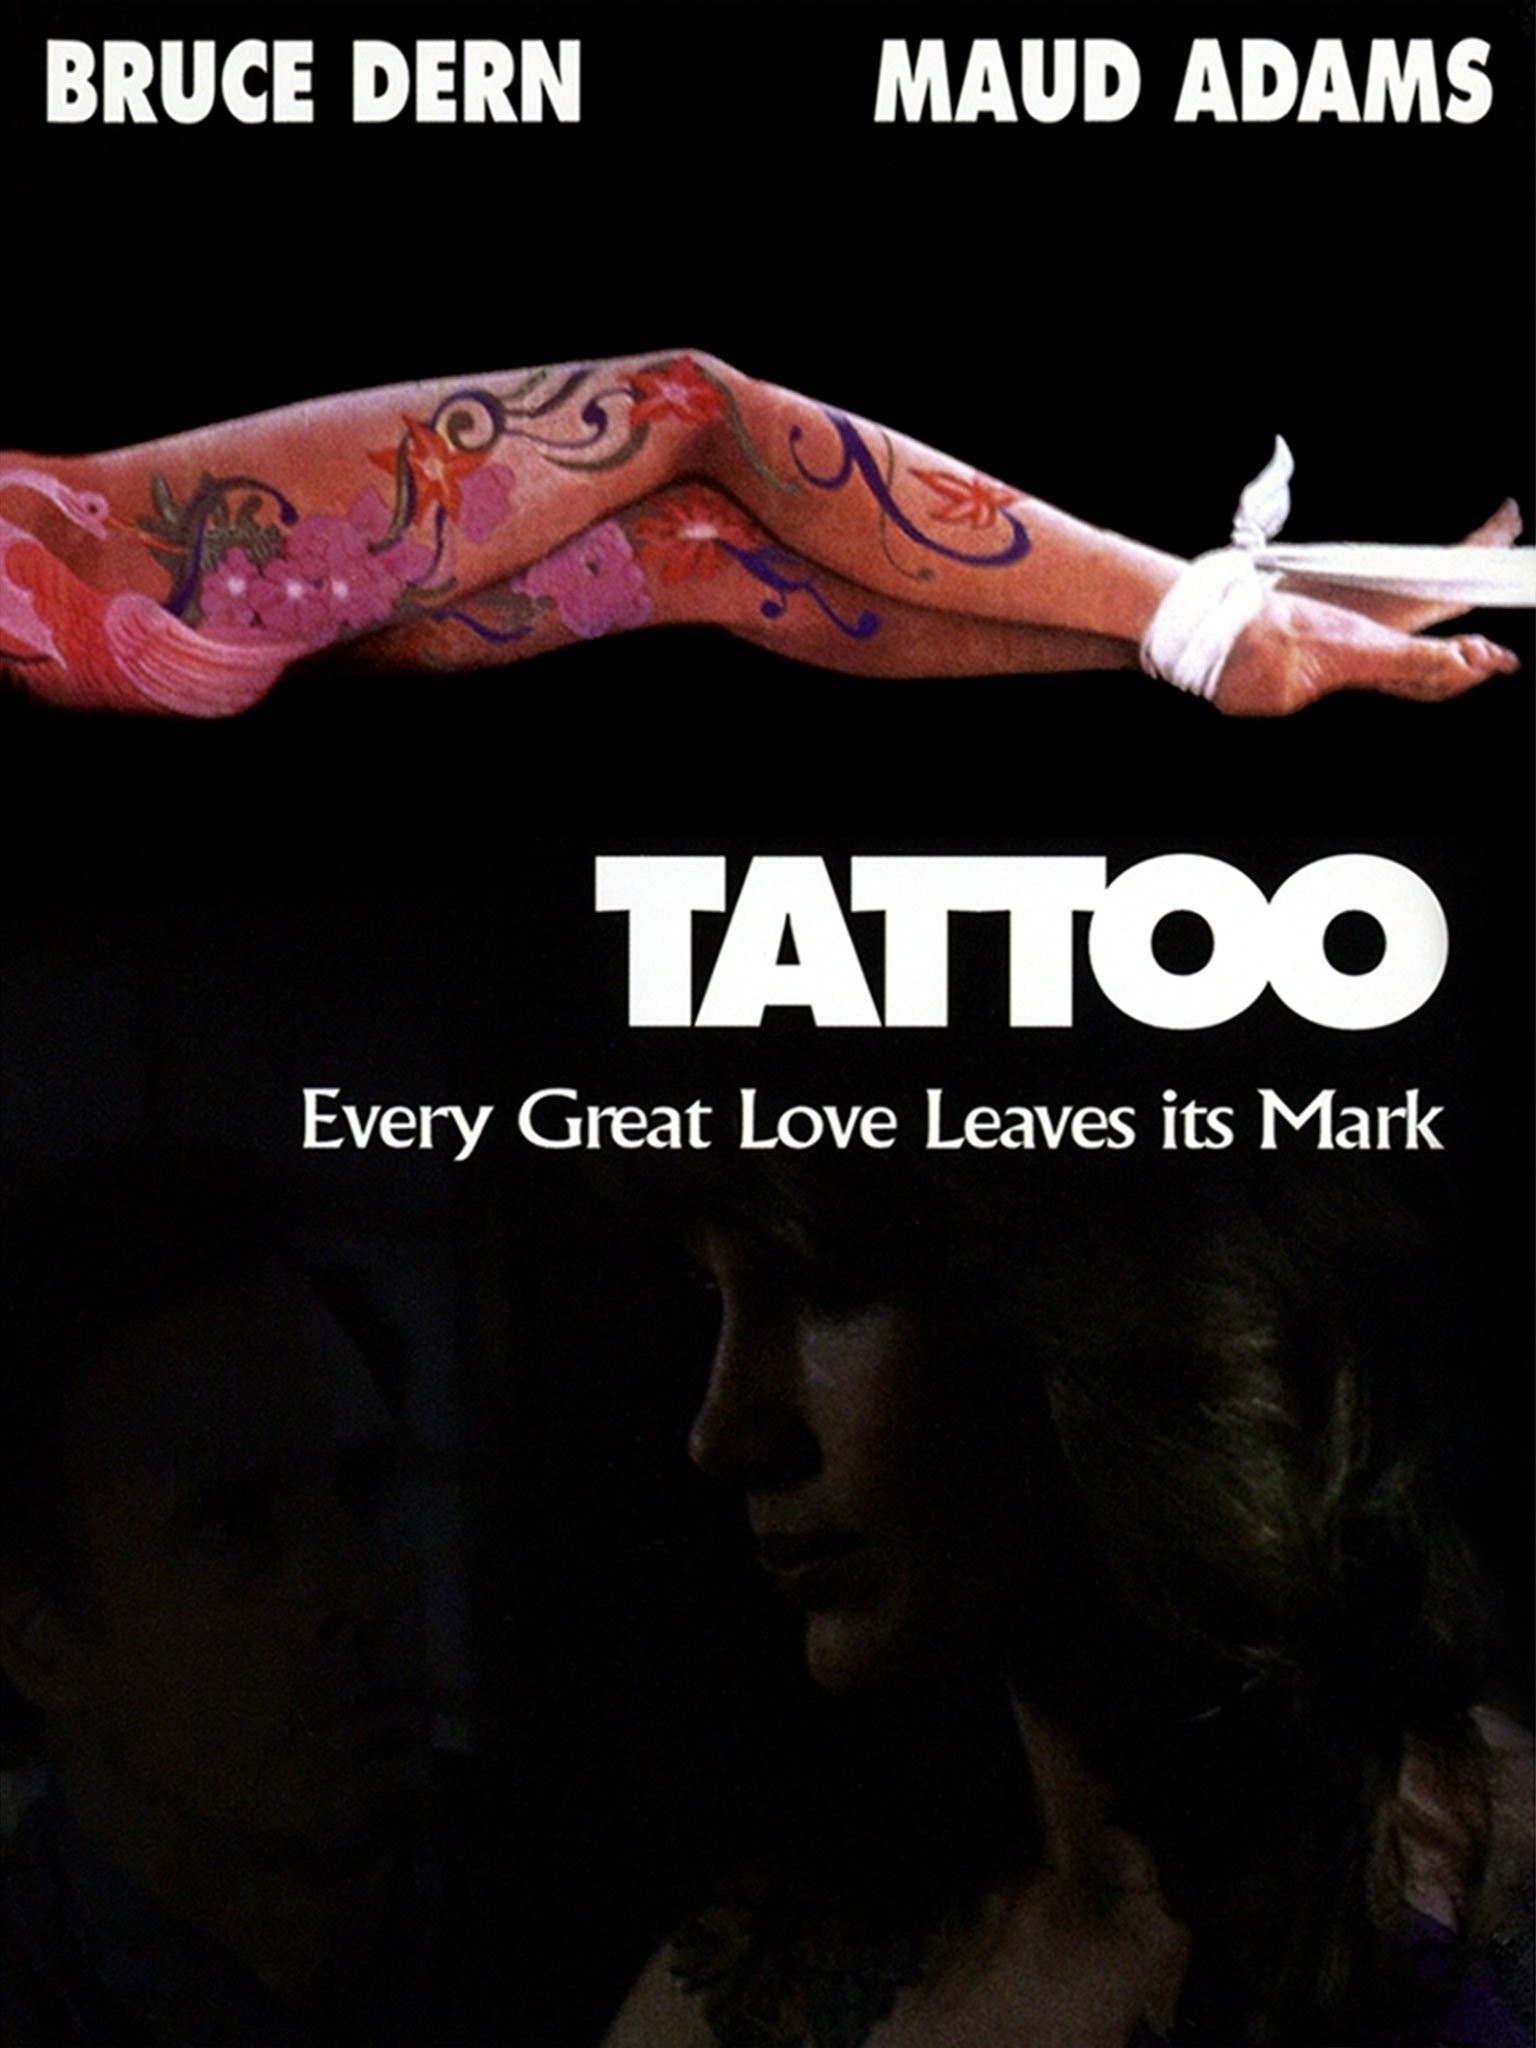 20 Famous Movie Tattoos (And What They Actually Mean)